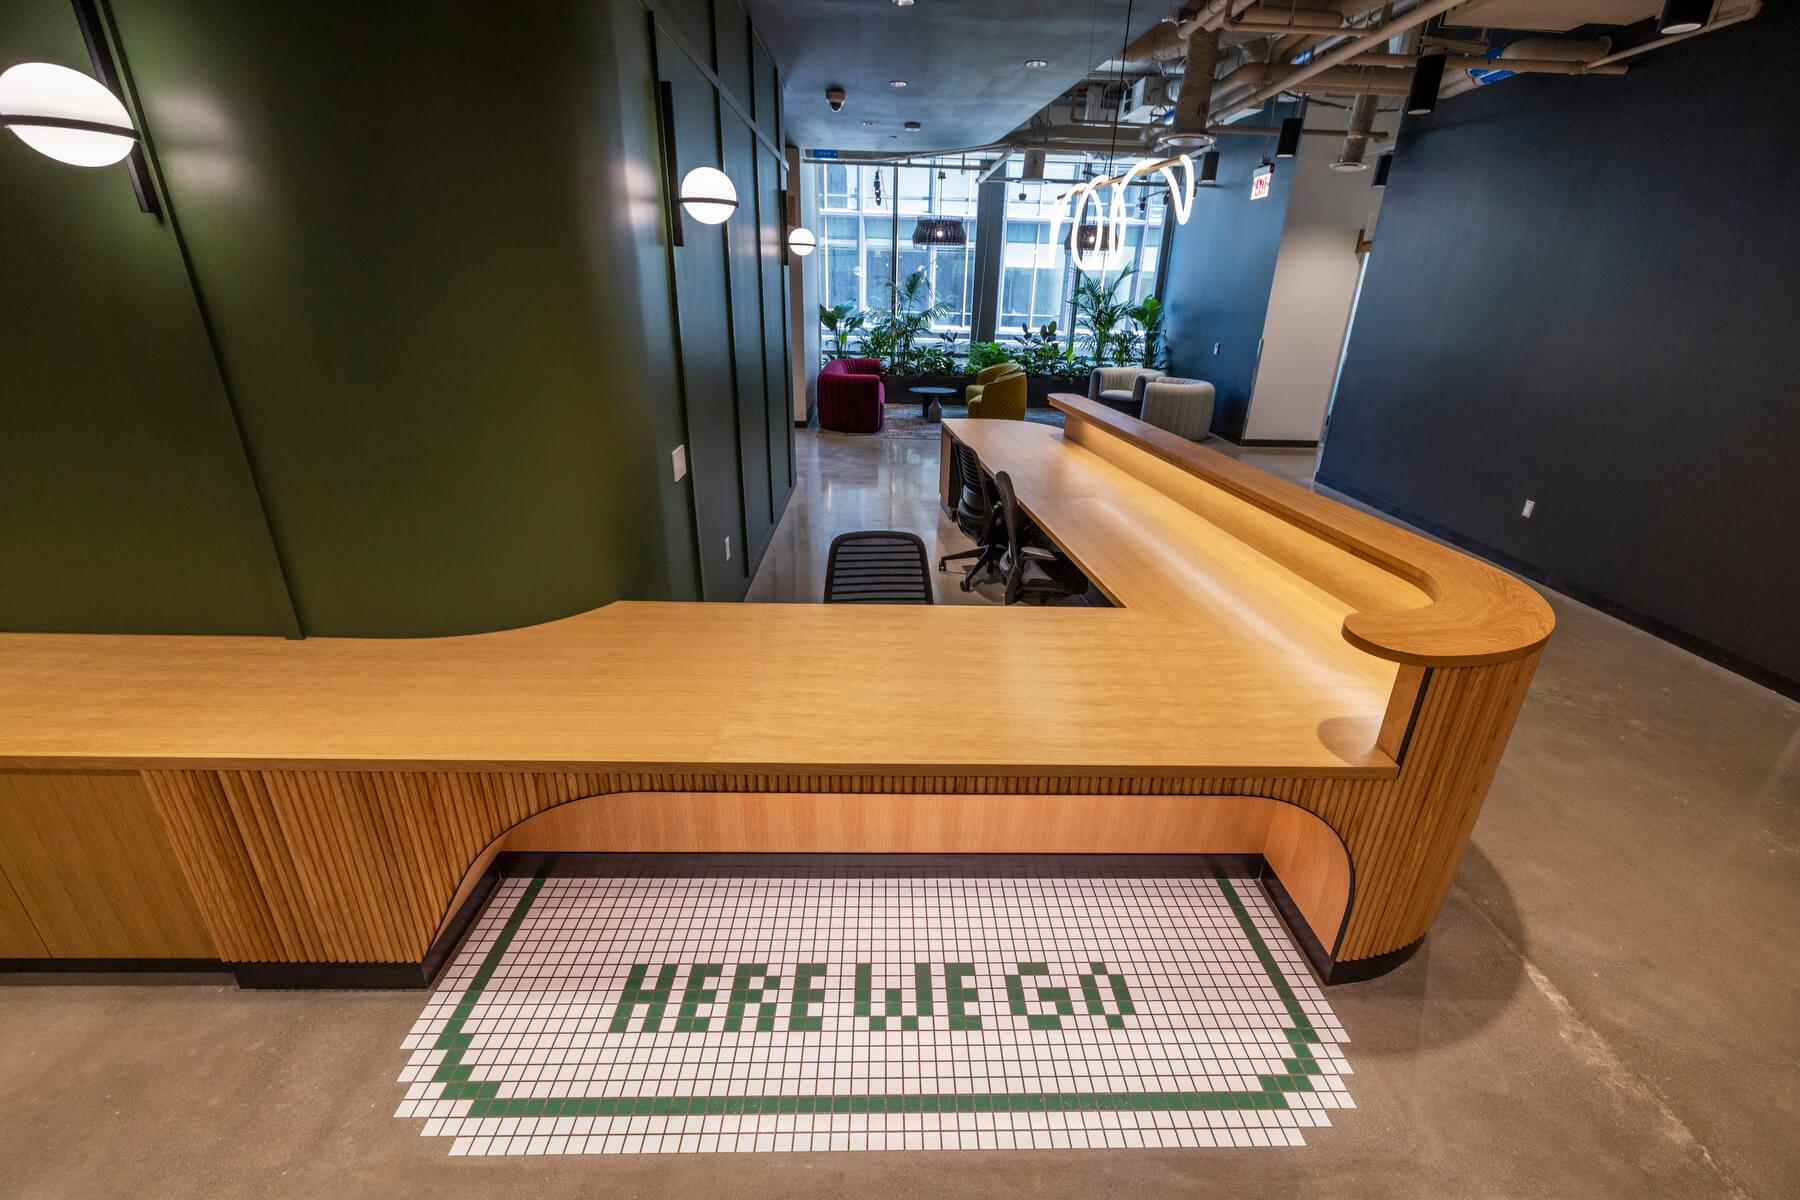 The coffee bar at Amazon HQ2. There is tiling that says "here we go."